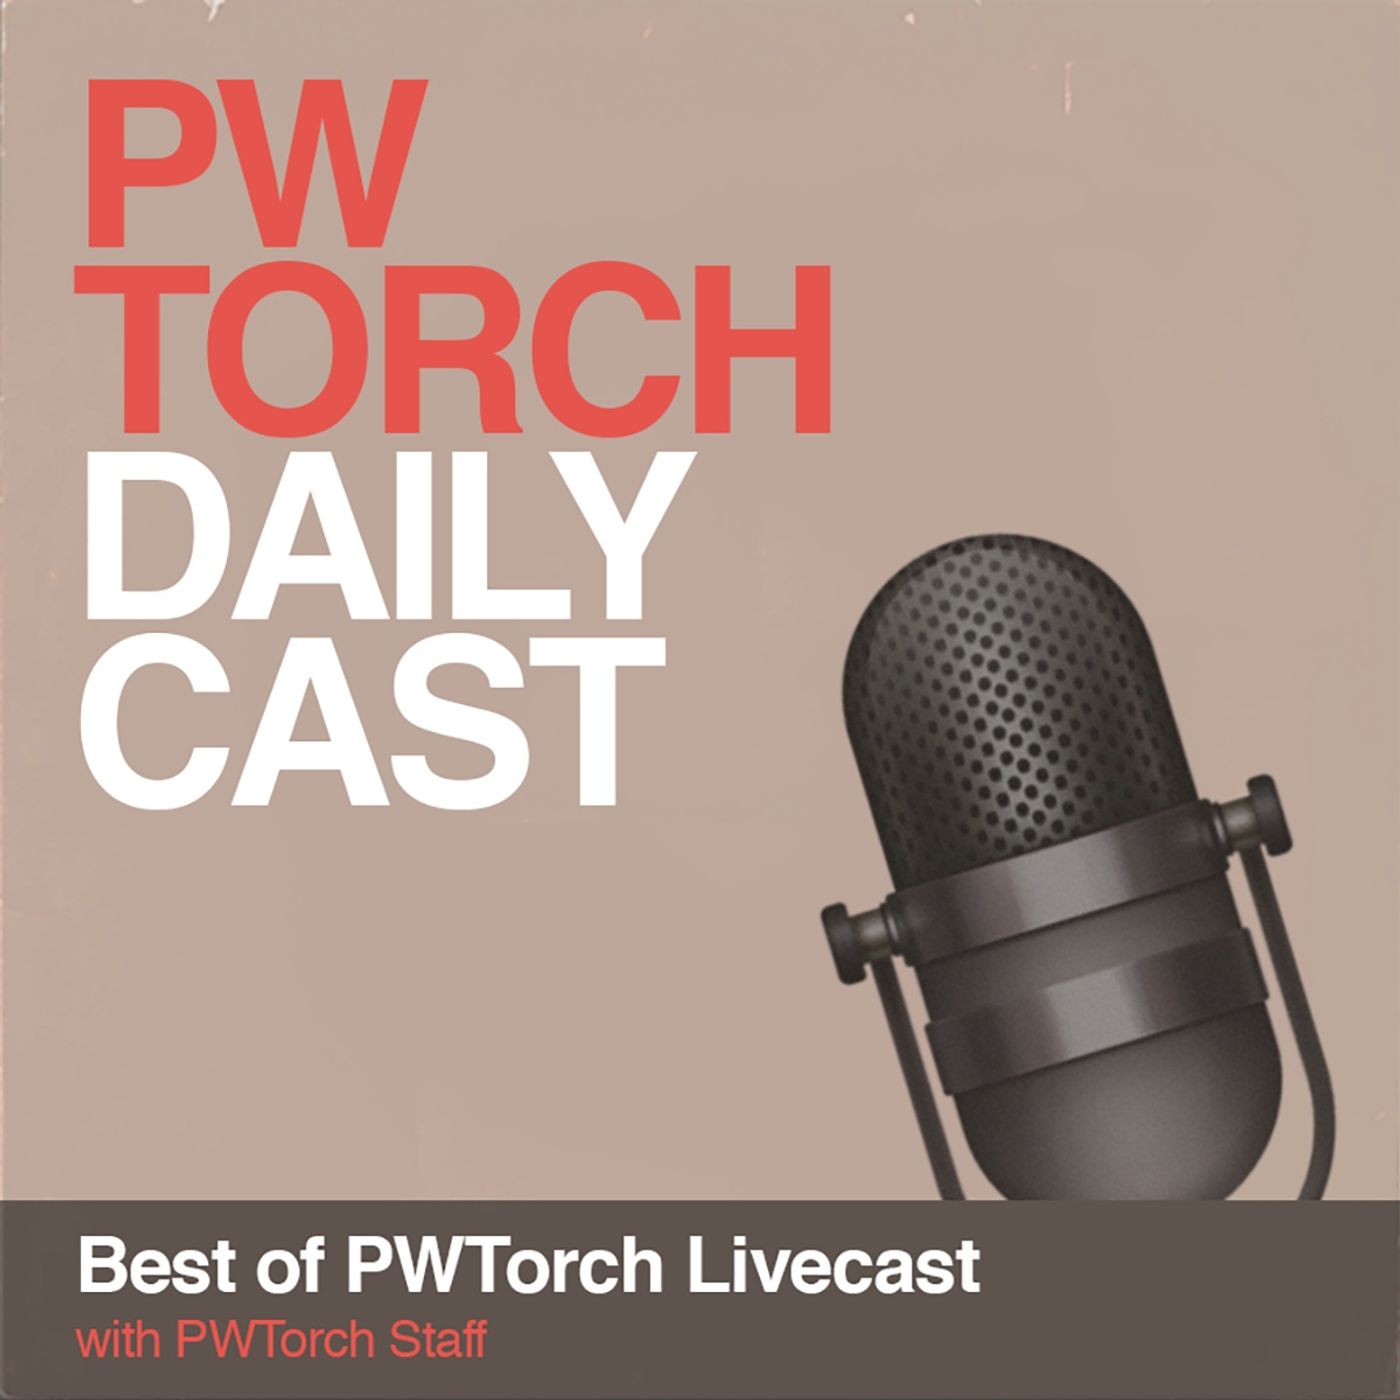 Best of PWTorch Livecast - (2-6-2014) Punk departs WWE, Sting headed to WWE, John Cena becoming a ”legacy star,” live callers, emails